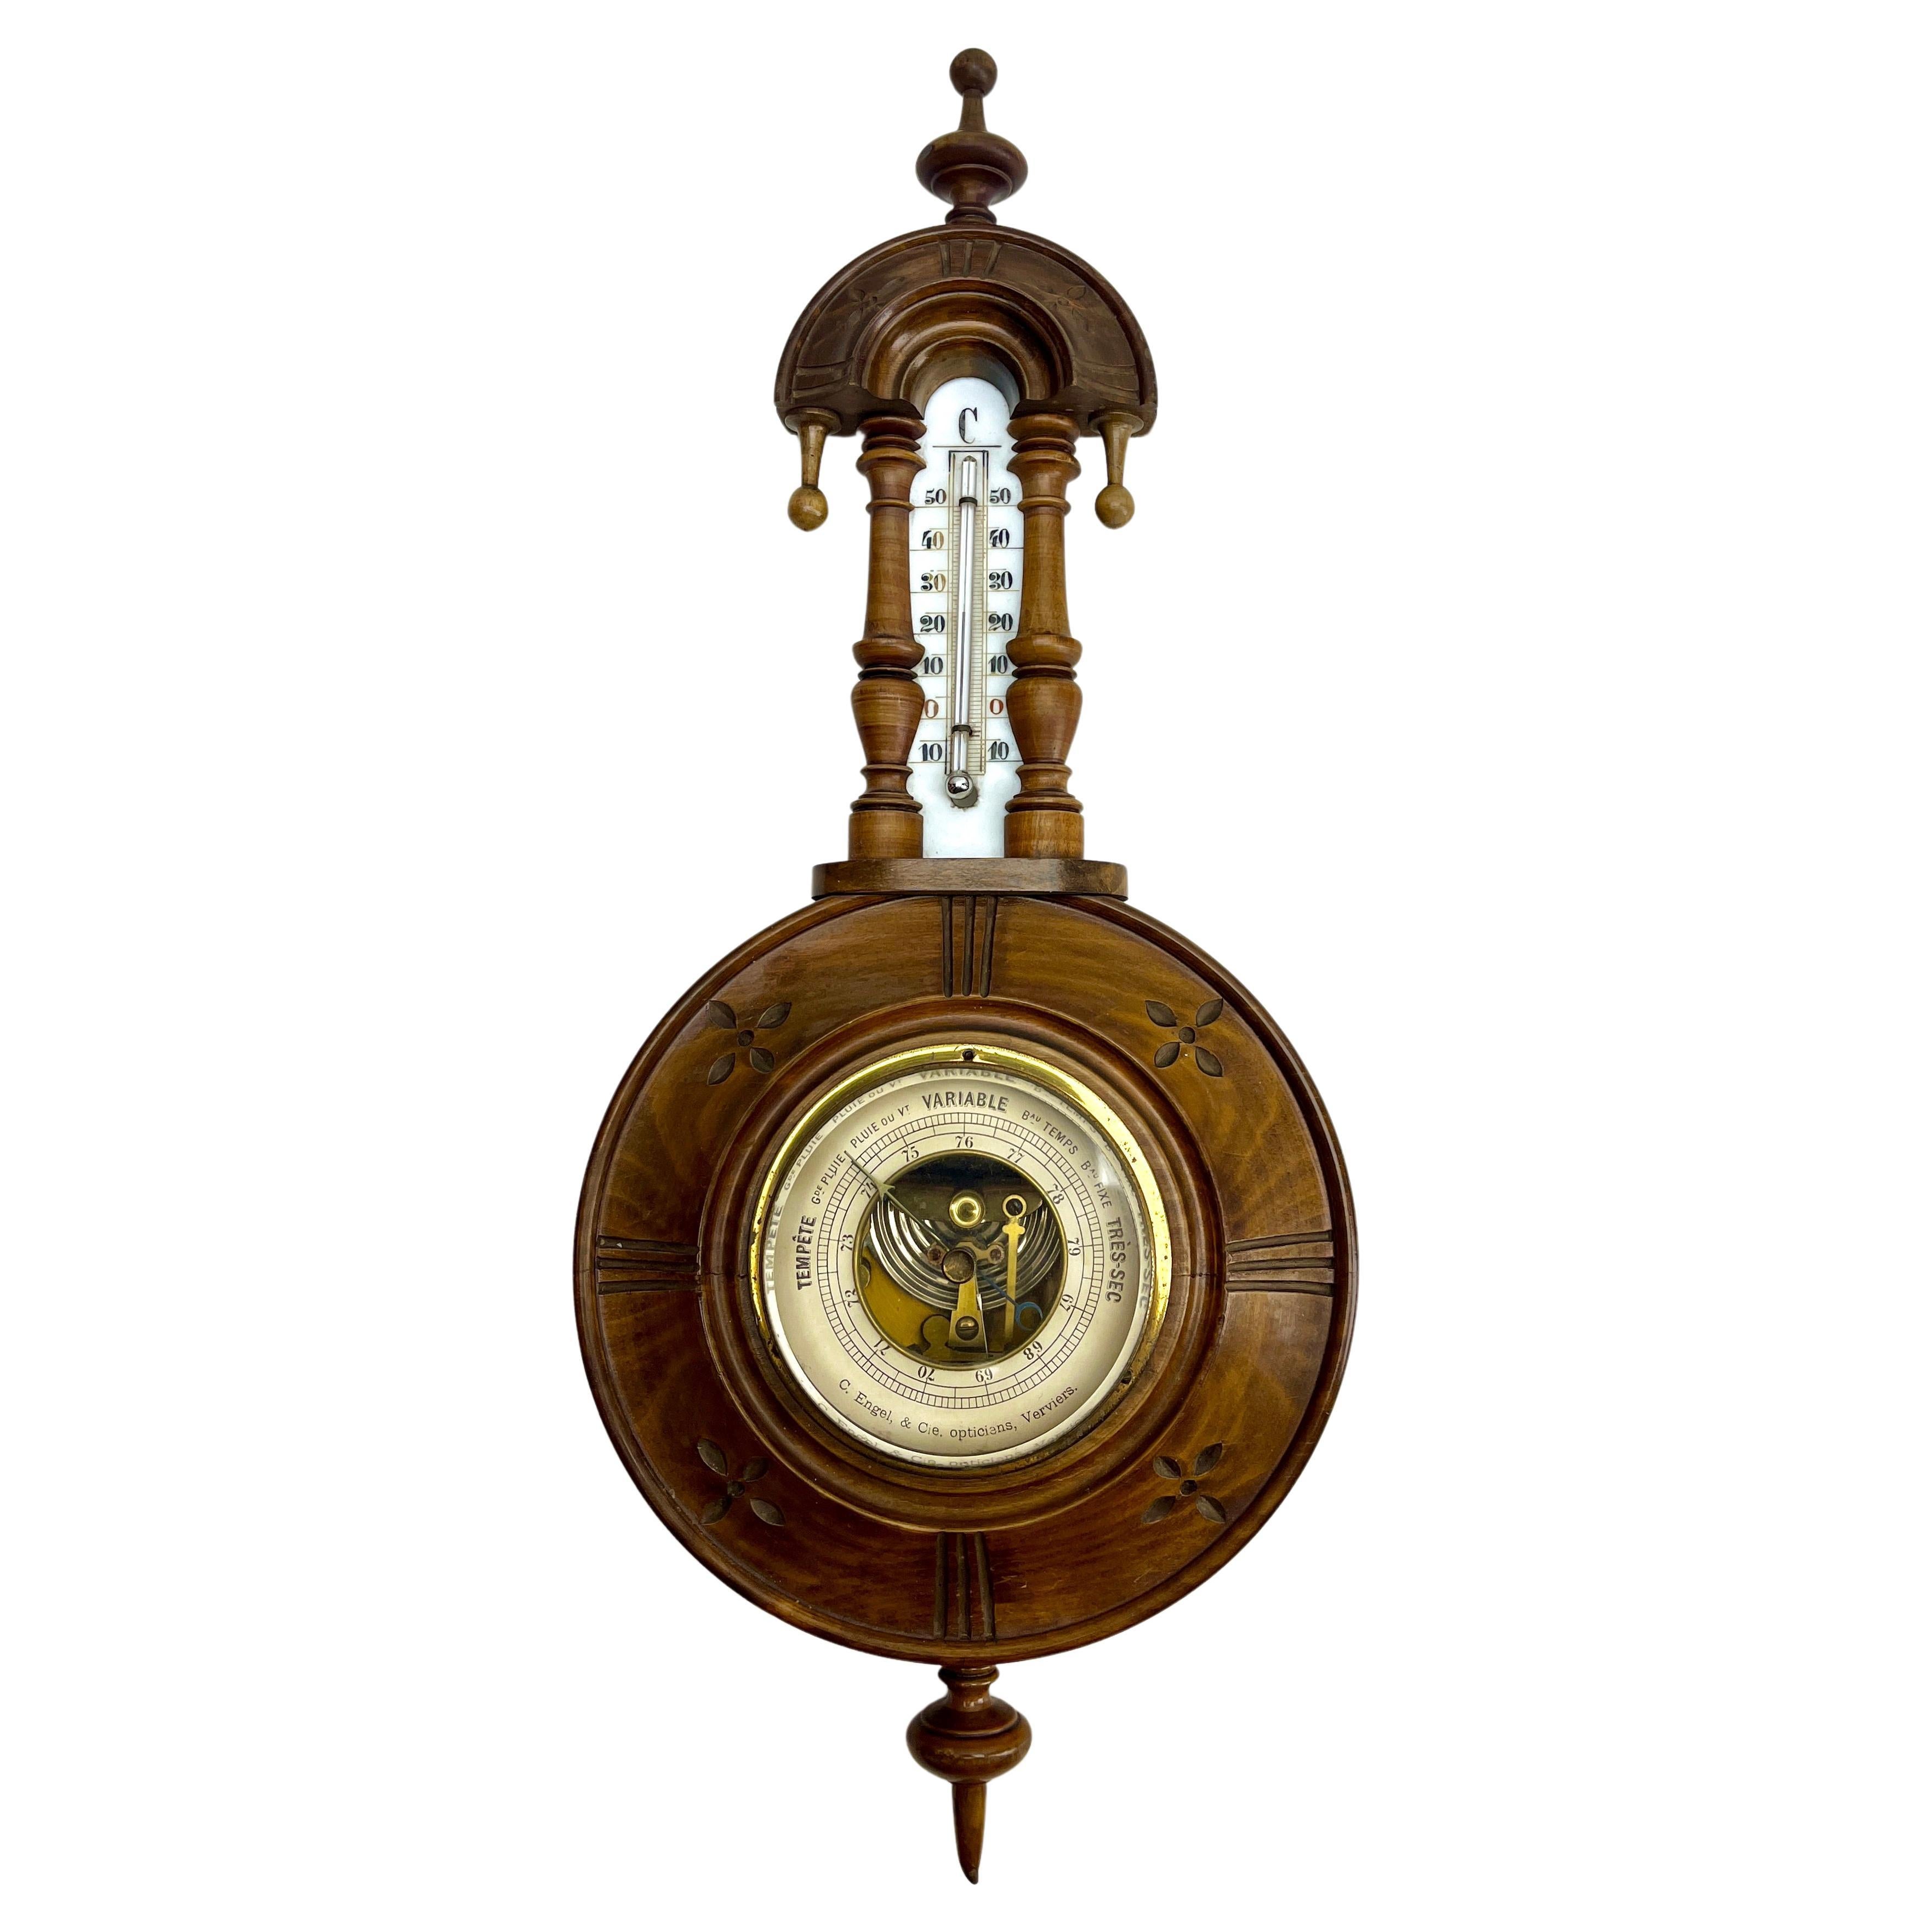 Wall-mounted weather station in carved walnut made in Verviers Belgium by C. Engel & Cie Opticiens Verviers
High quality mechanism with jeweled movement barometer and thermometer (in centigrade)
Unusual design with high relief  and flowers in from